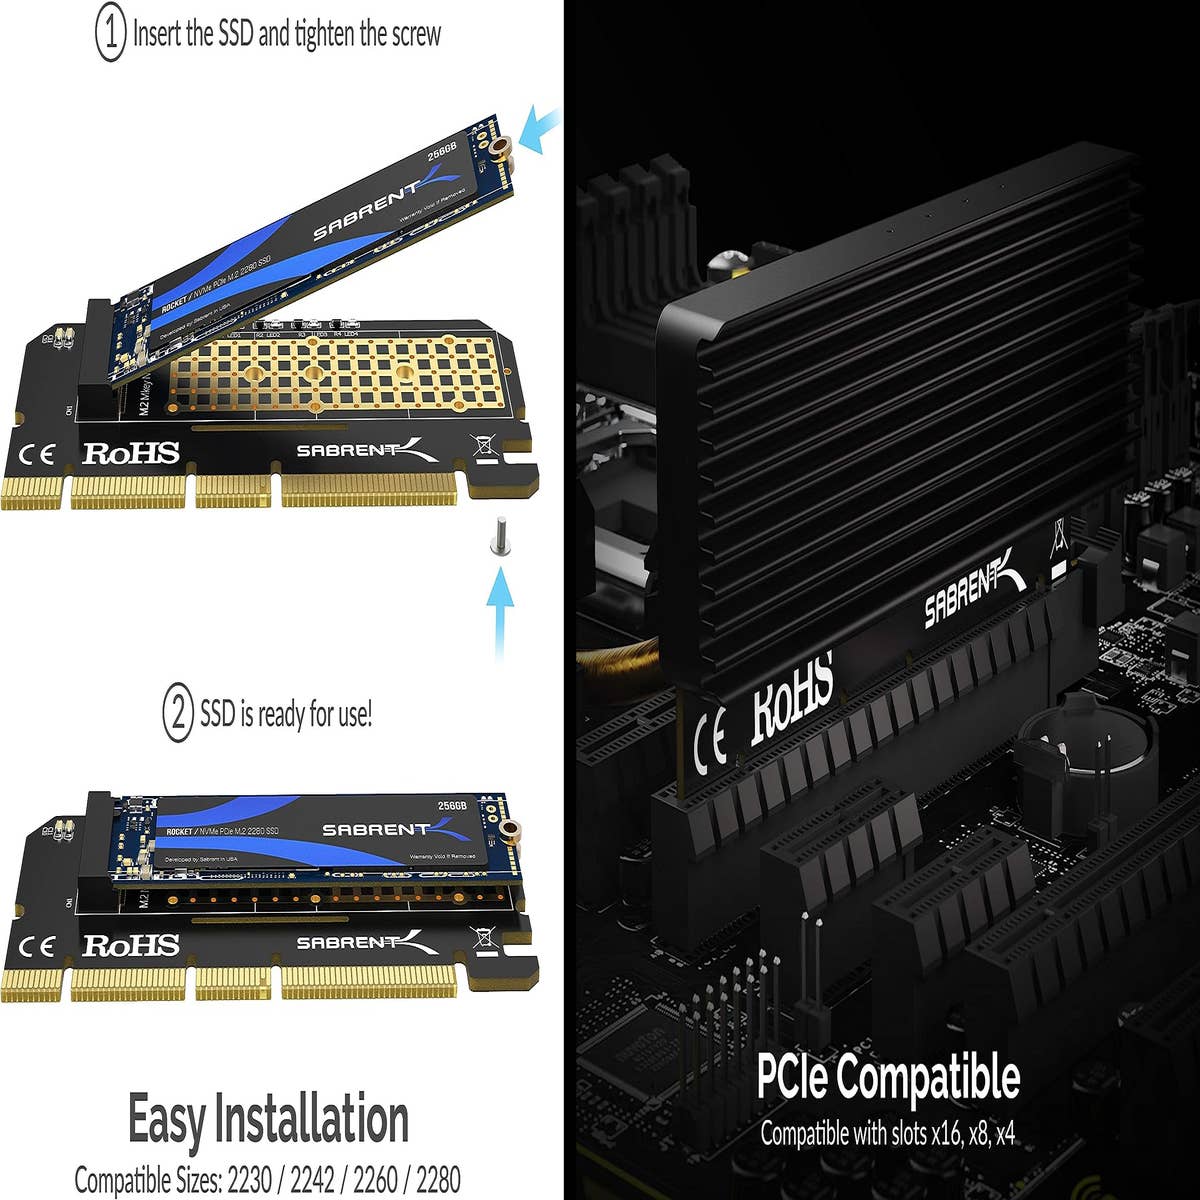 4-Drive M.2 NVMe SSD to PCIe 3.0 x4 Adapter Card - Sabrent